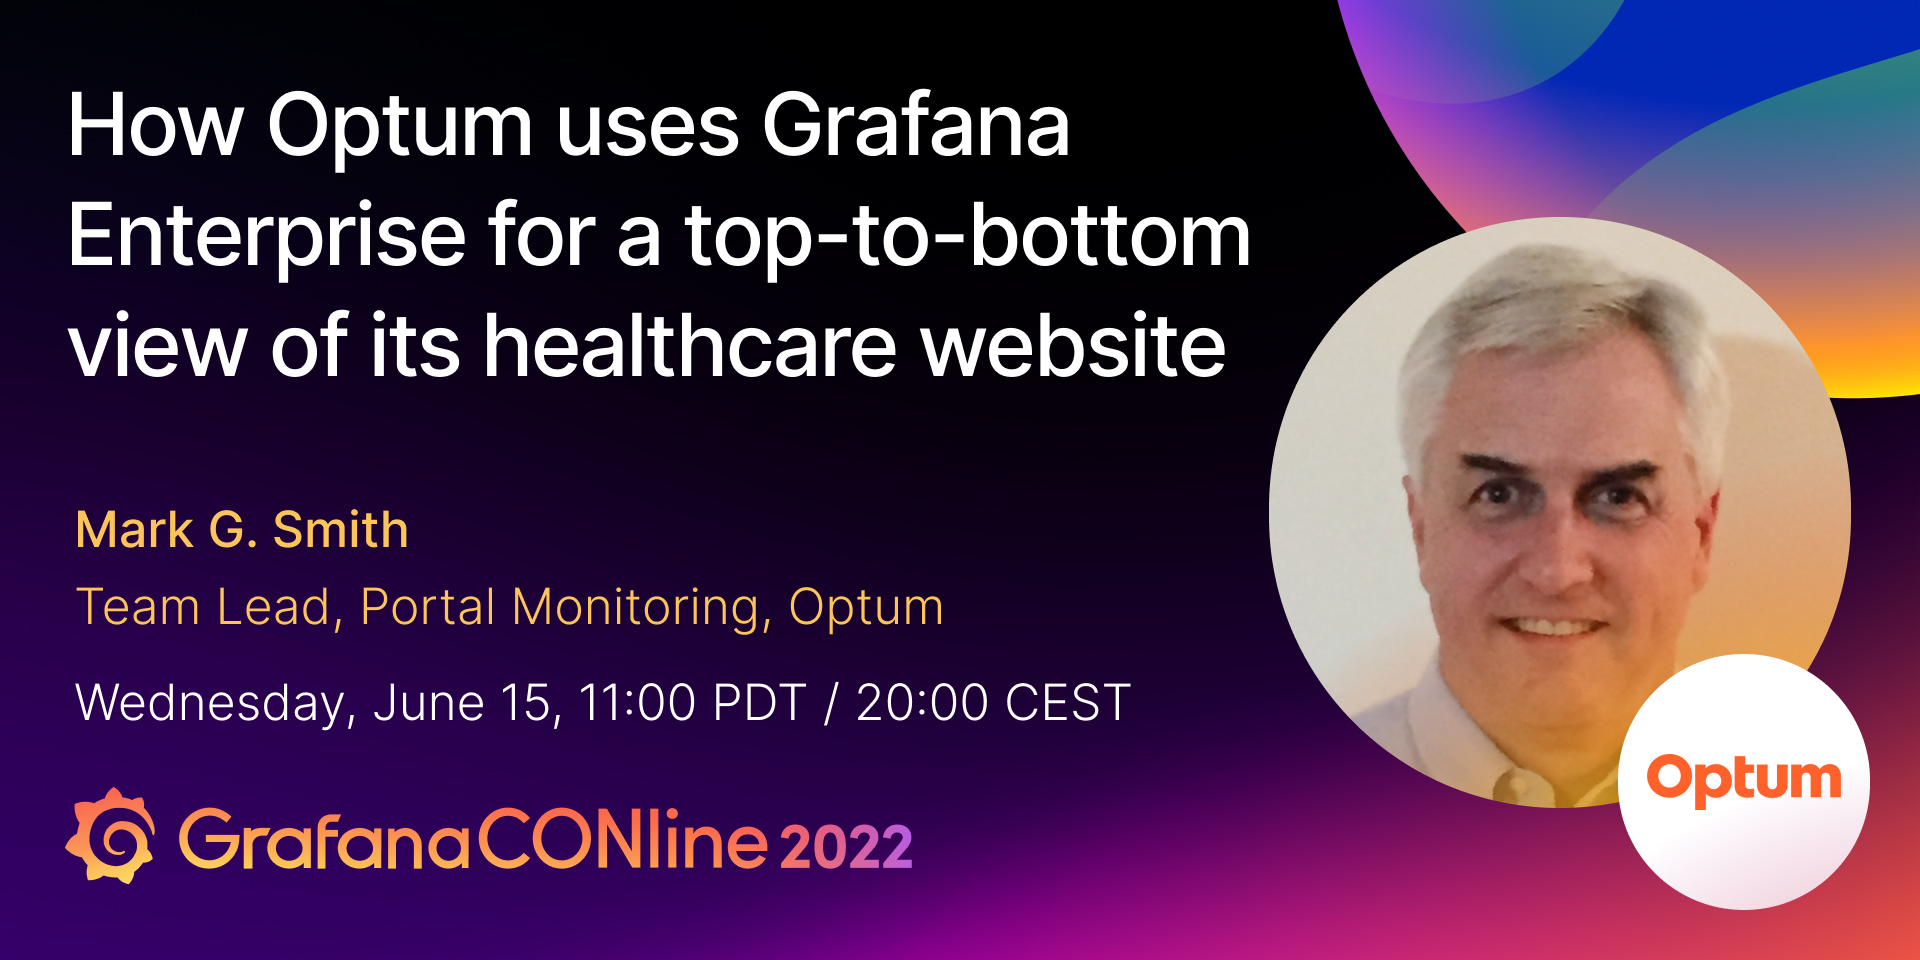 How Optum uses Grafana Enterprise for a top-to-bottom view of its healthcare website